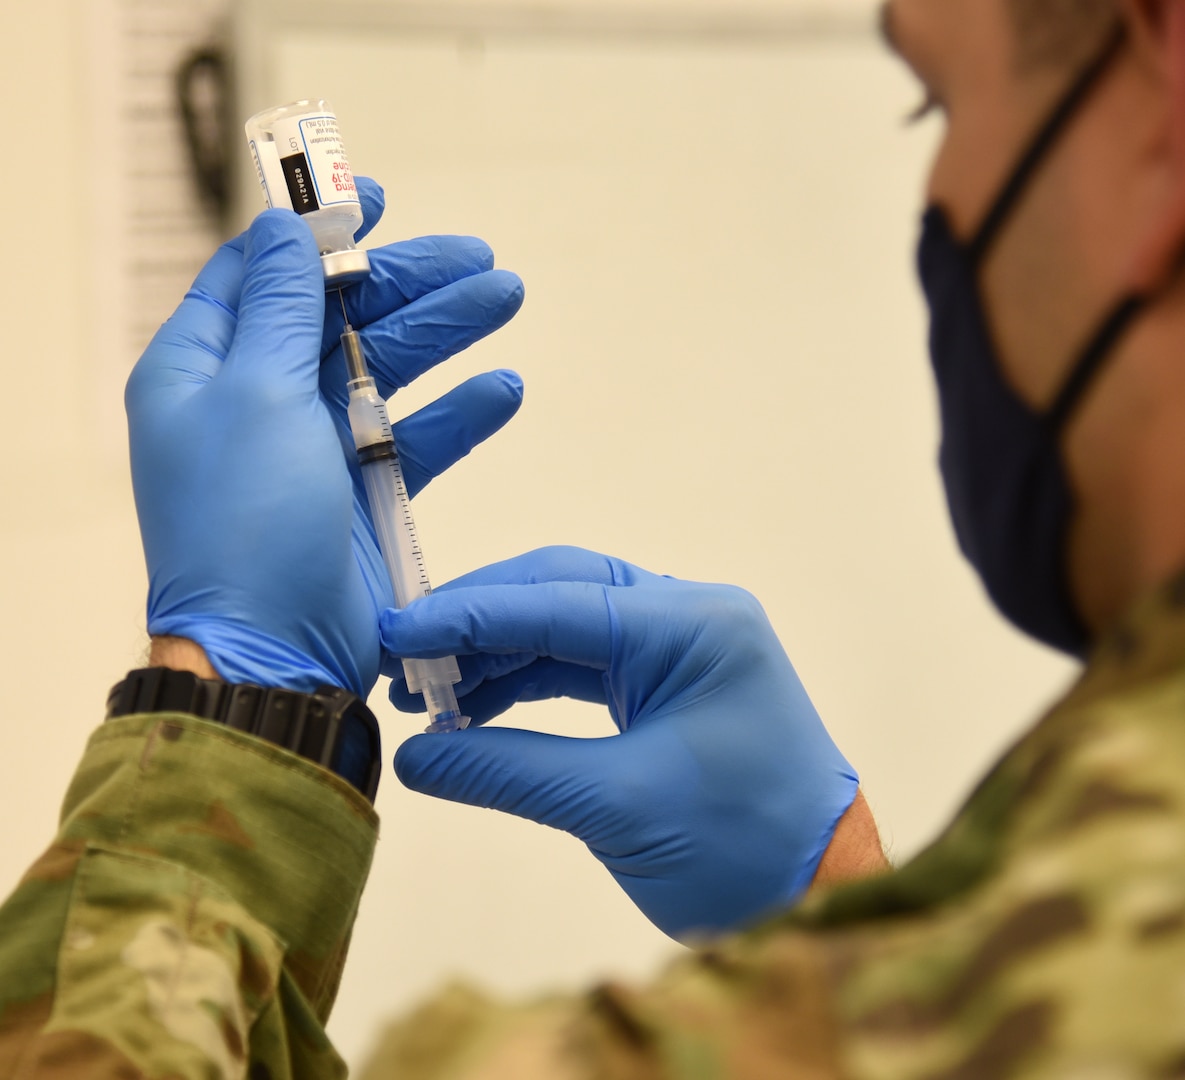 A Virginia National Guard Soldier prepares a COVID-19 vaccination March 10, 2021, at Fort Pickett, Virginia. The Virginia National Guard is reconfiguring the task force currently conducting COVID-19 testing and mask fit training to create mobile vaccination teams to provide additional capacity for the statewide vaccination program.